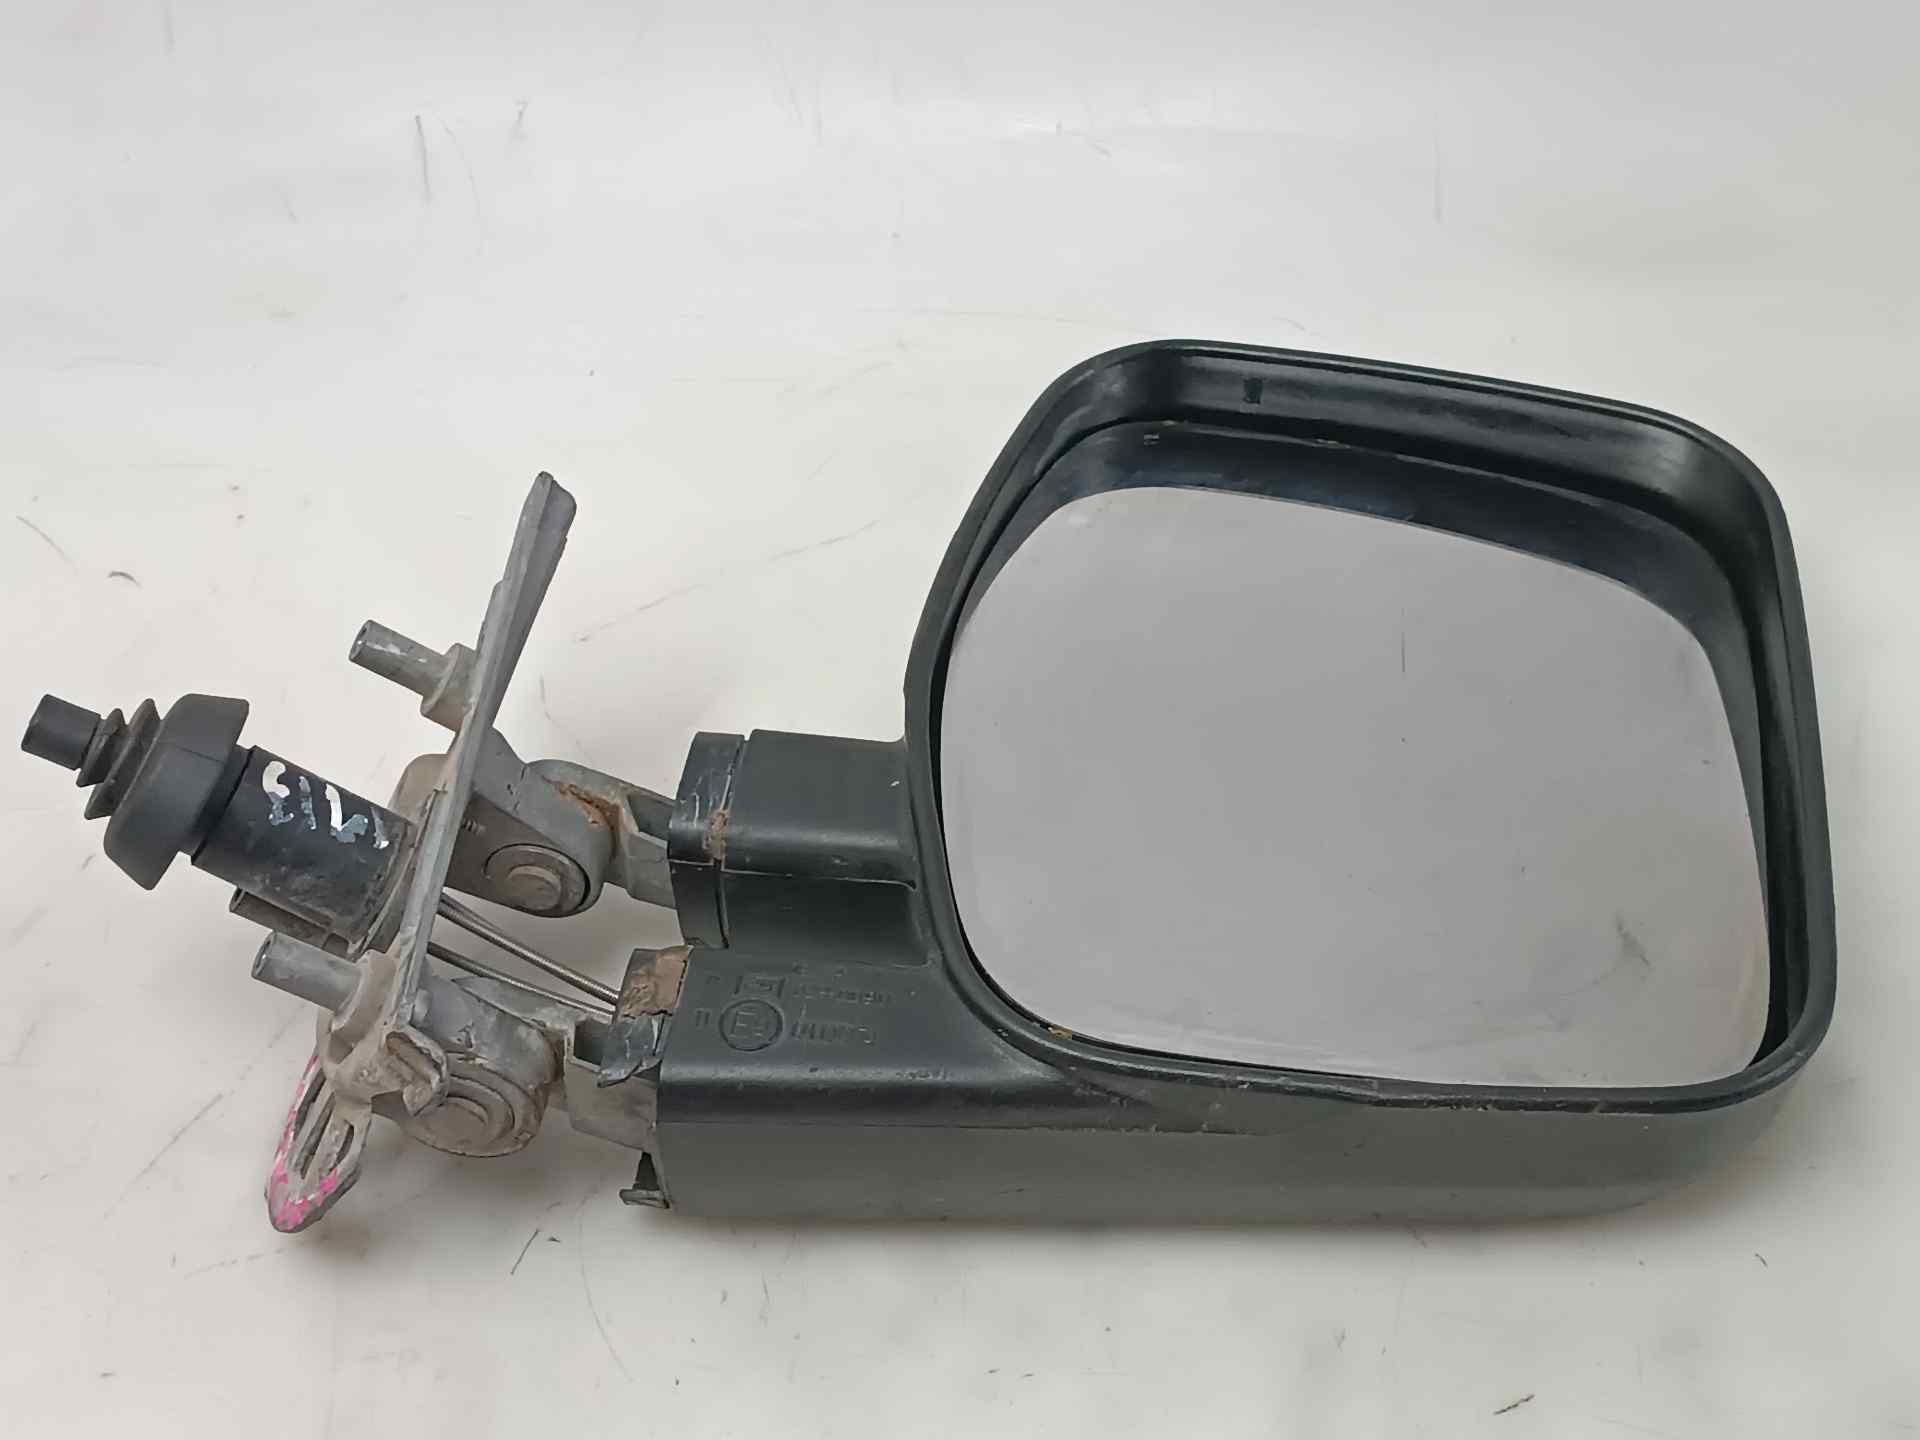 MERCEDES-BENZ E-Class W210 (1995-2002) Right Side Wing Mirror 010074, 010074, 02*0090 24583683